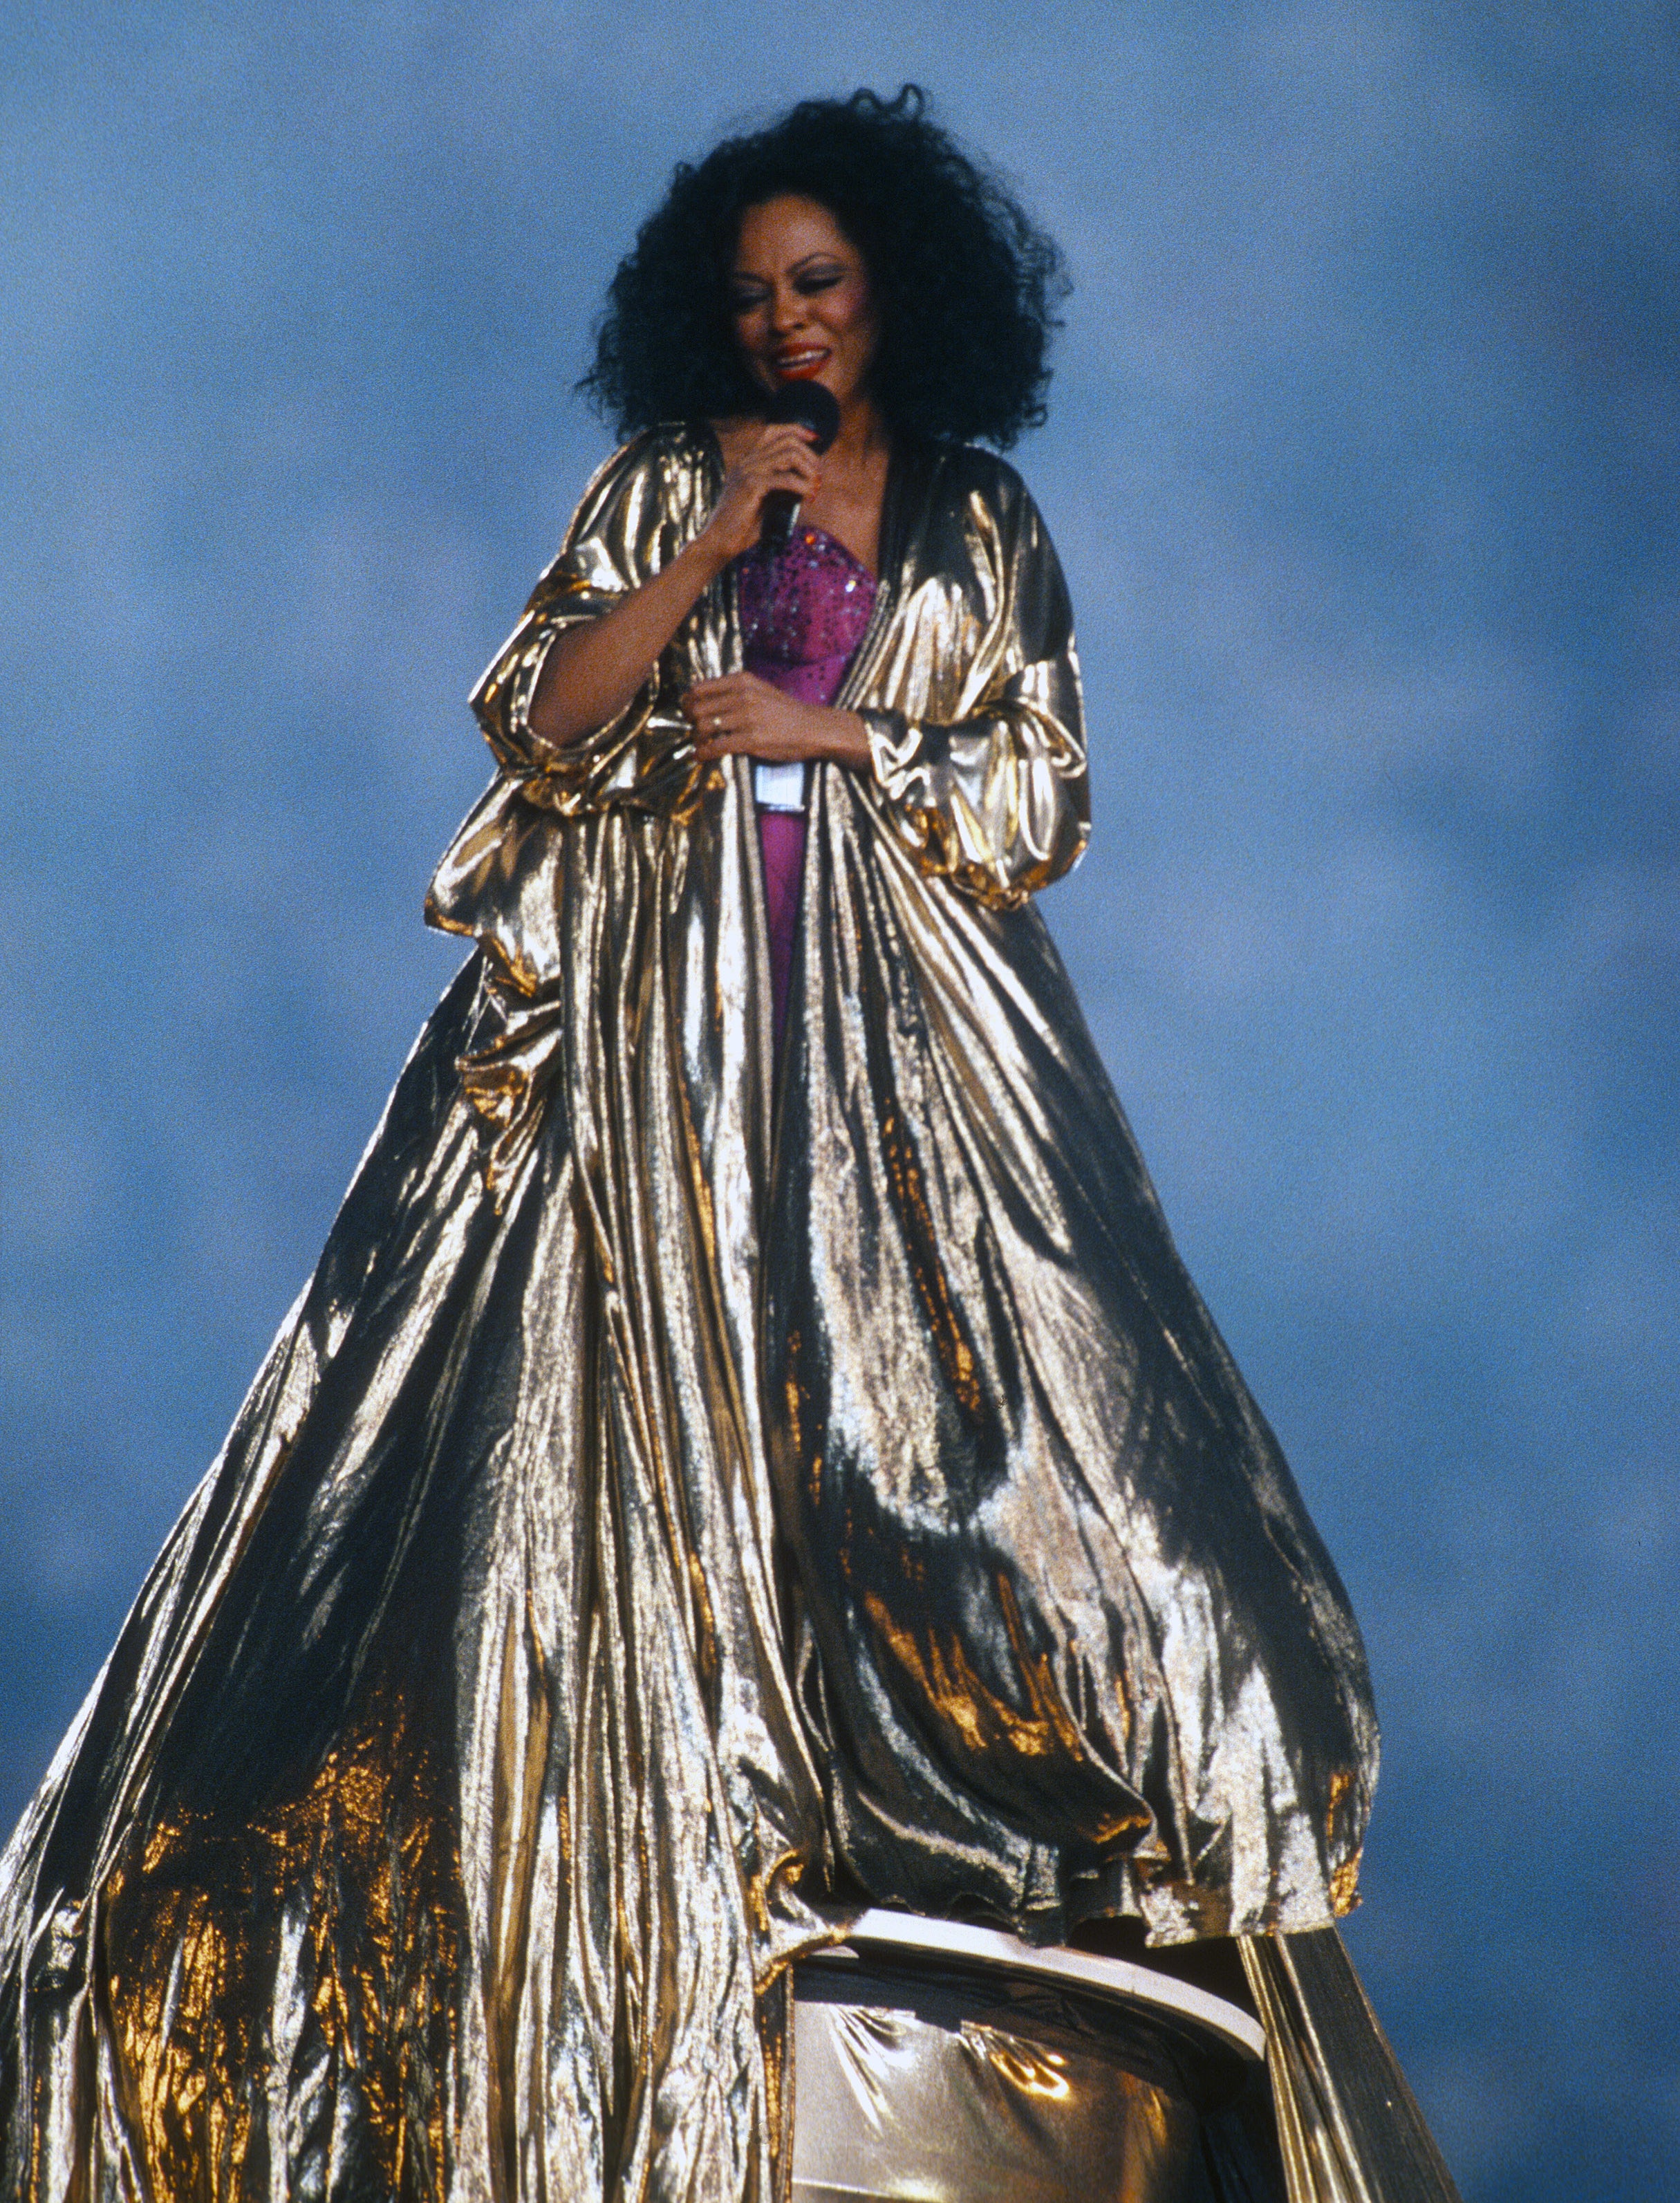 Diana Ross preforms during haft time of Super Bowl XXX between the Dallas Cowboys and Pittsburgh Steelers on January 28, 1996